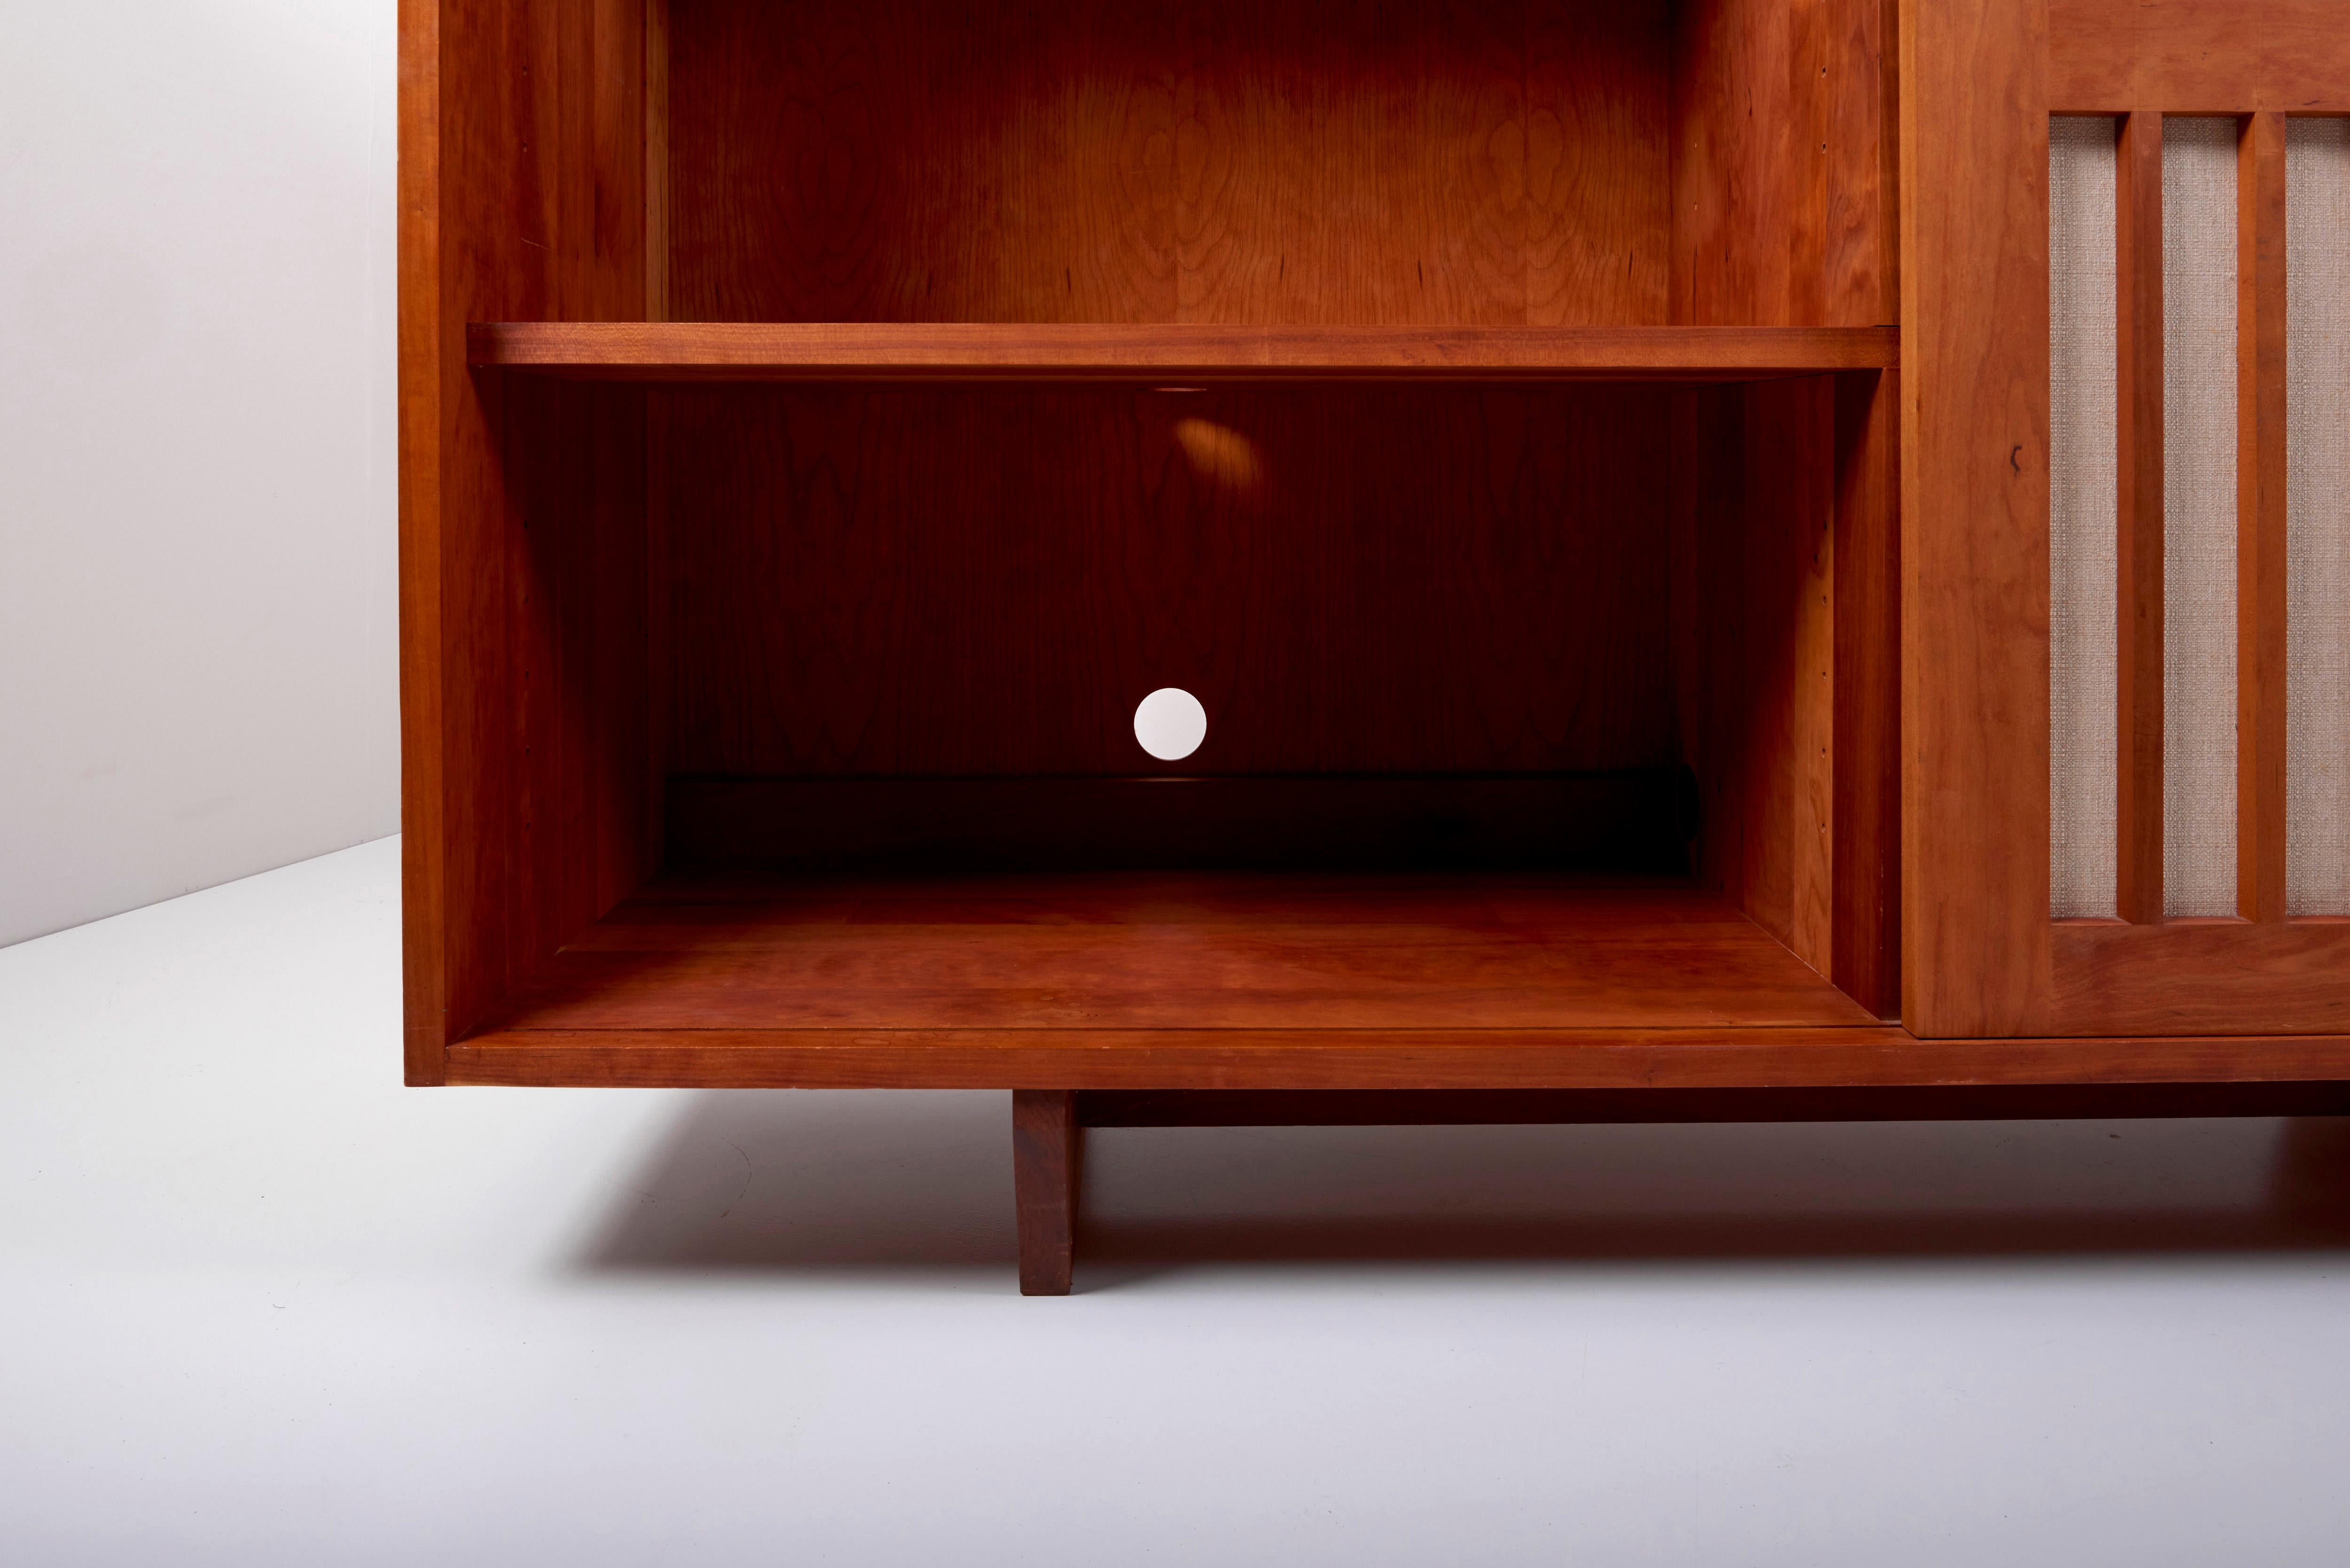 Studio Craft Cabinet by Arden Riddle, US, 1960s For Sale 2